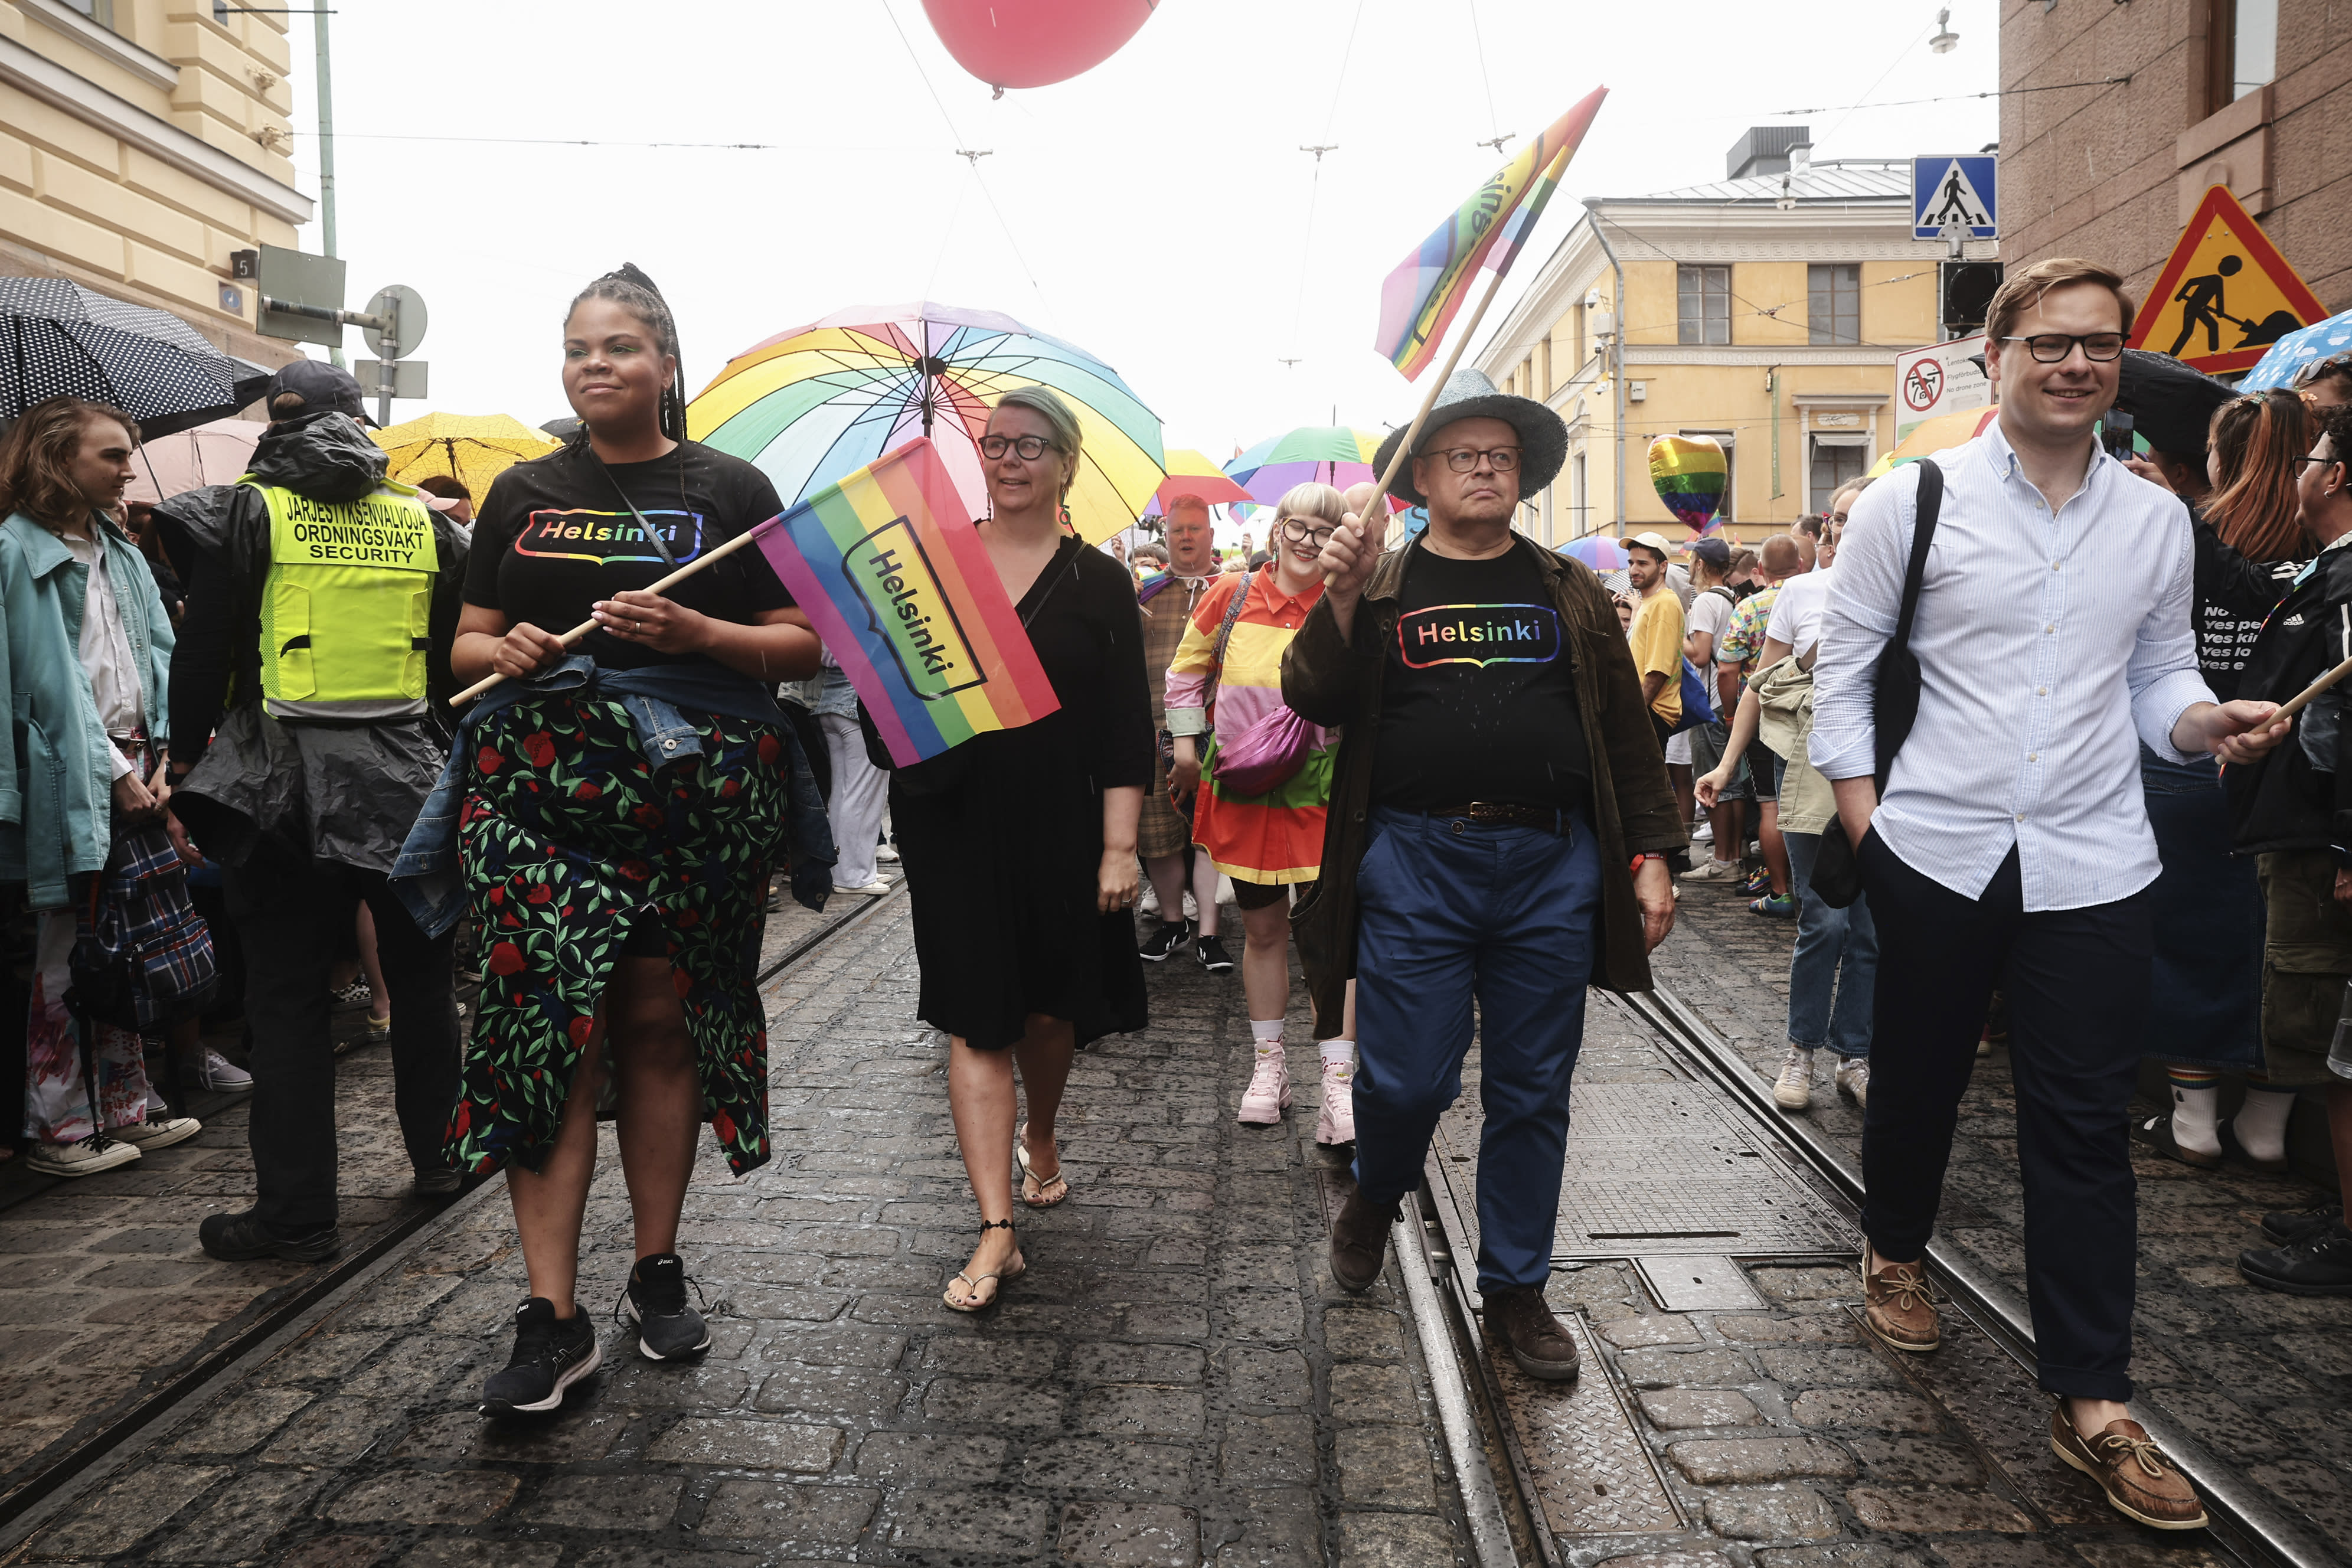 100,000 participate in the Helsinki Pride parade, including NCP politicians